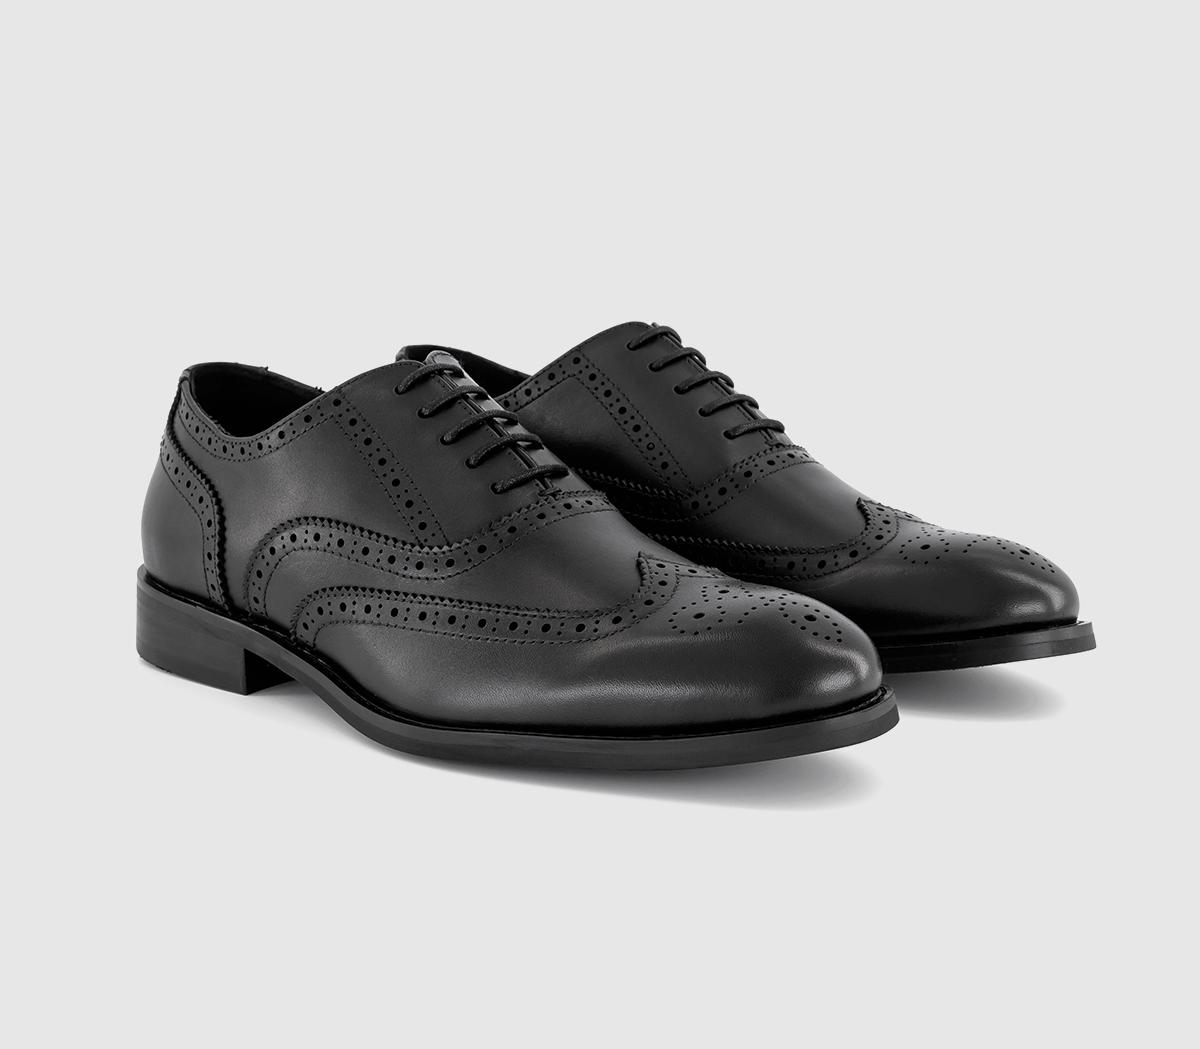 OFFICE Mens Milton Oxford Brogue Shoes Black Leather, 8